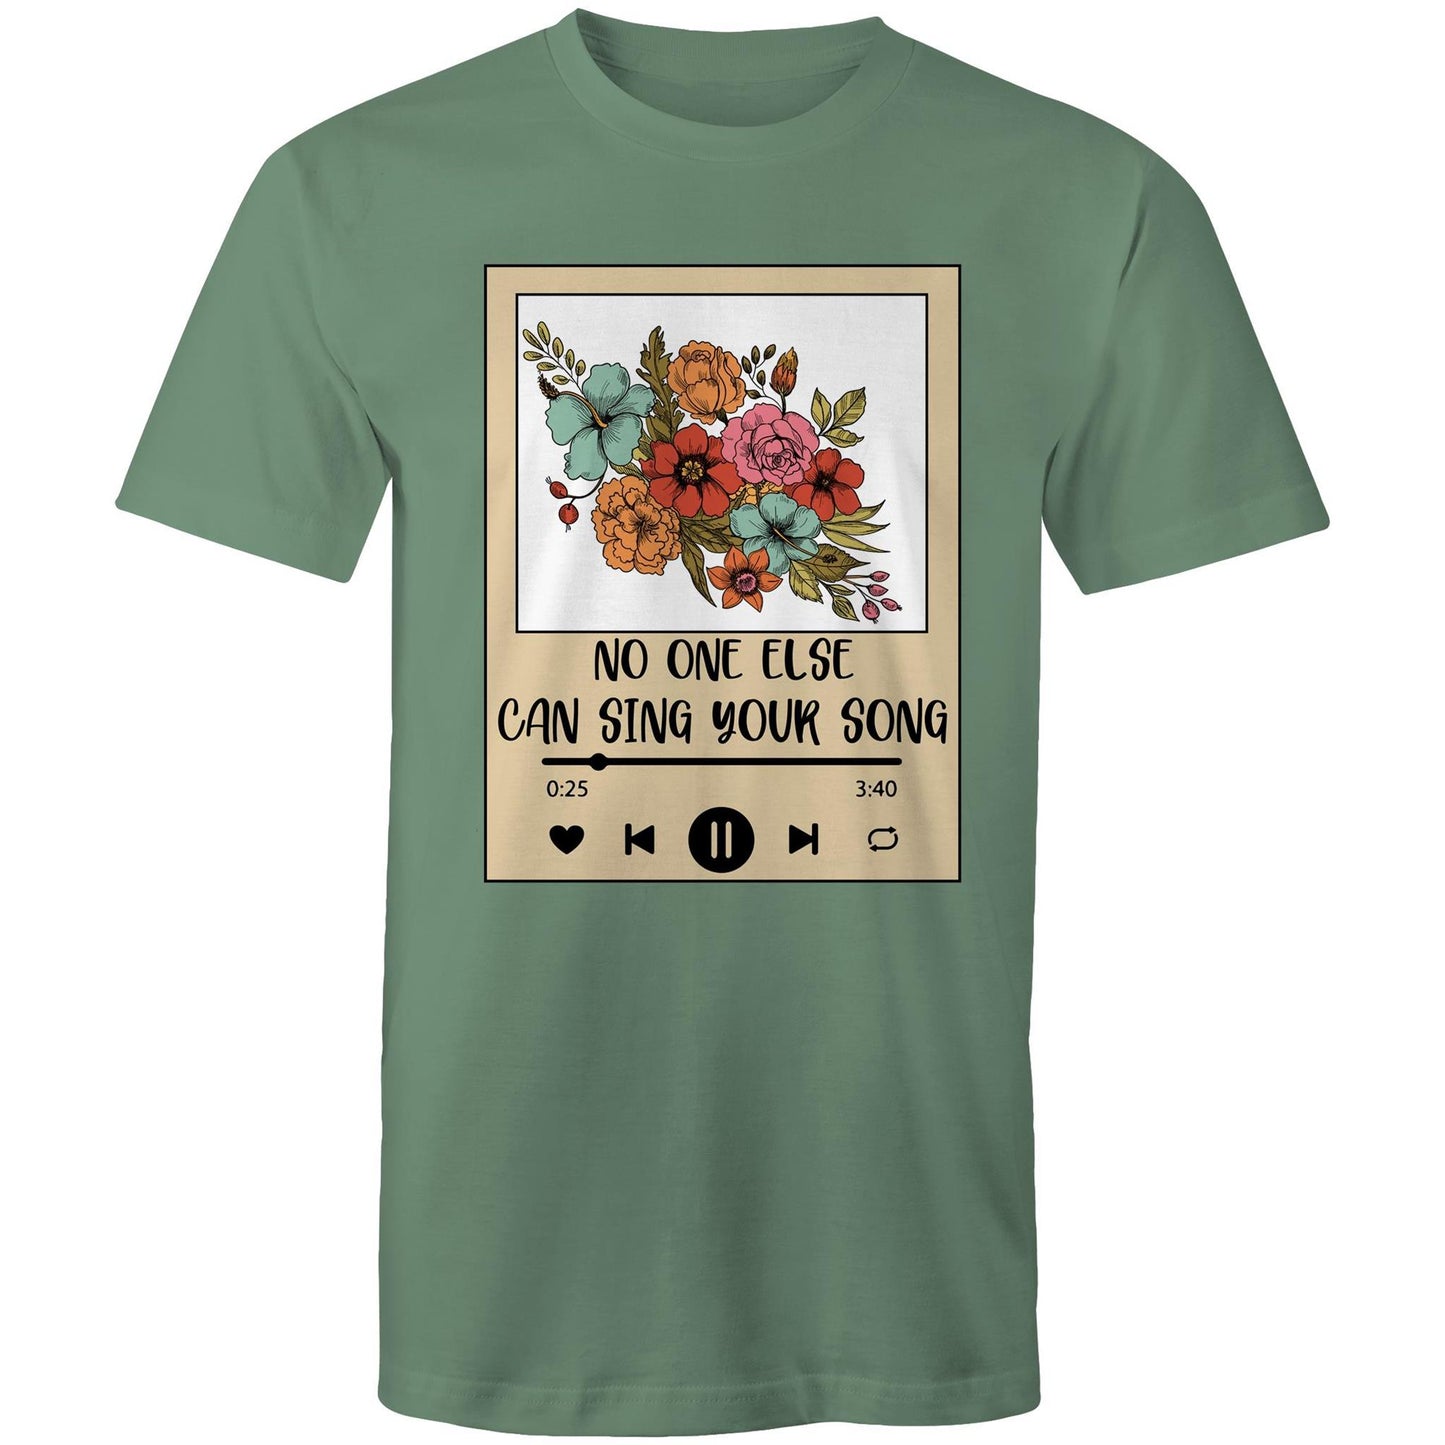 Mens T-Shirt - No one else can sing your song